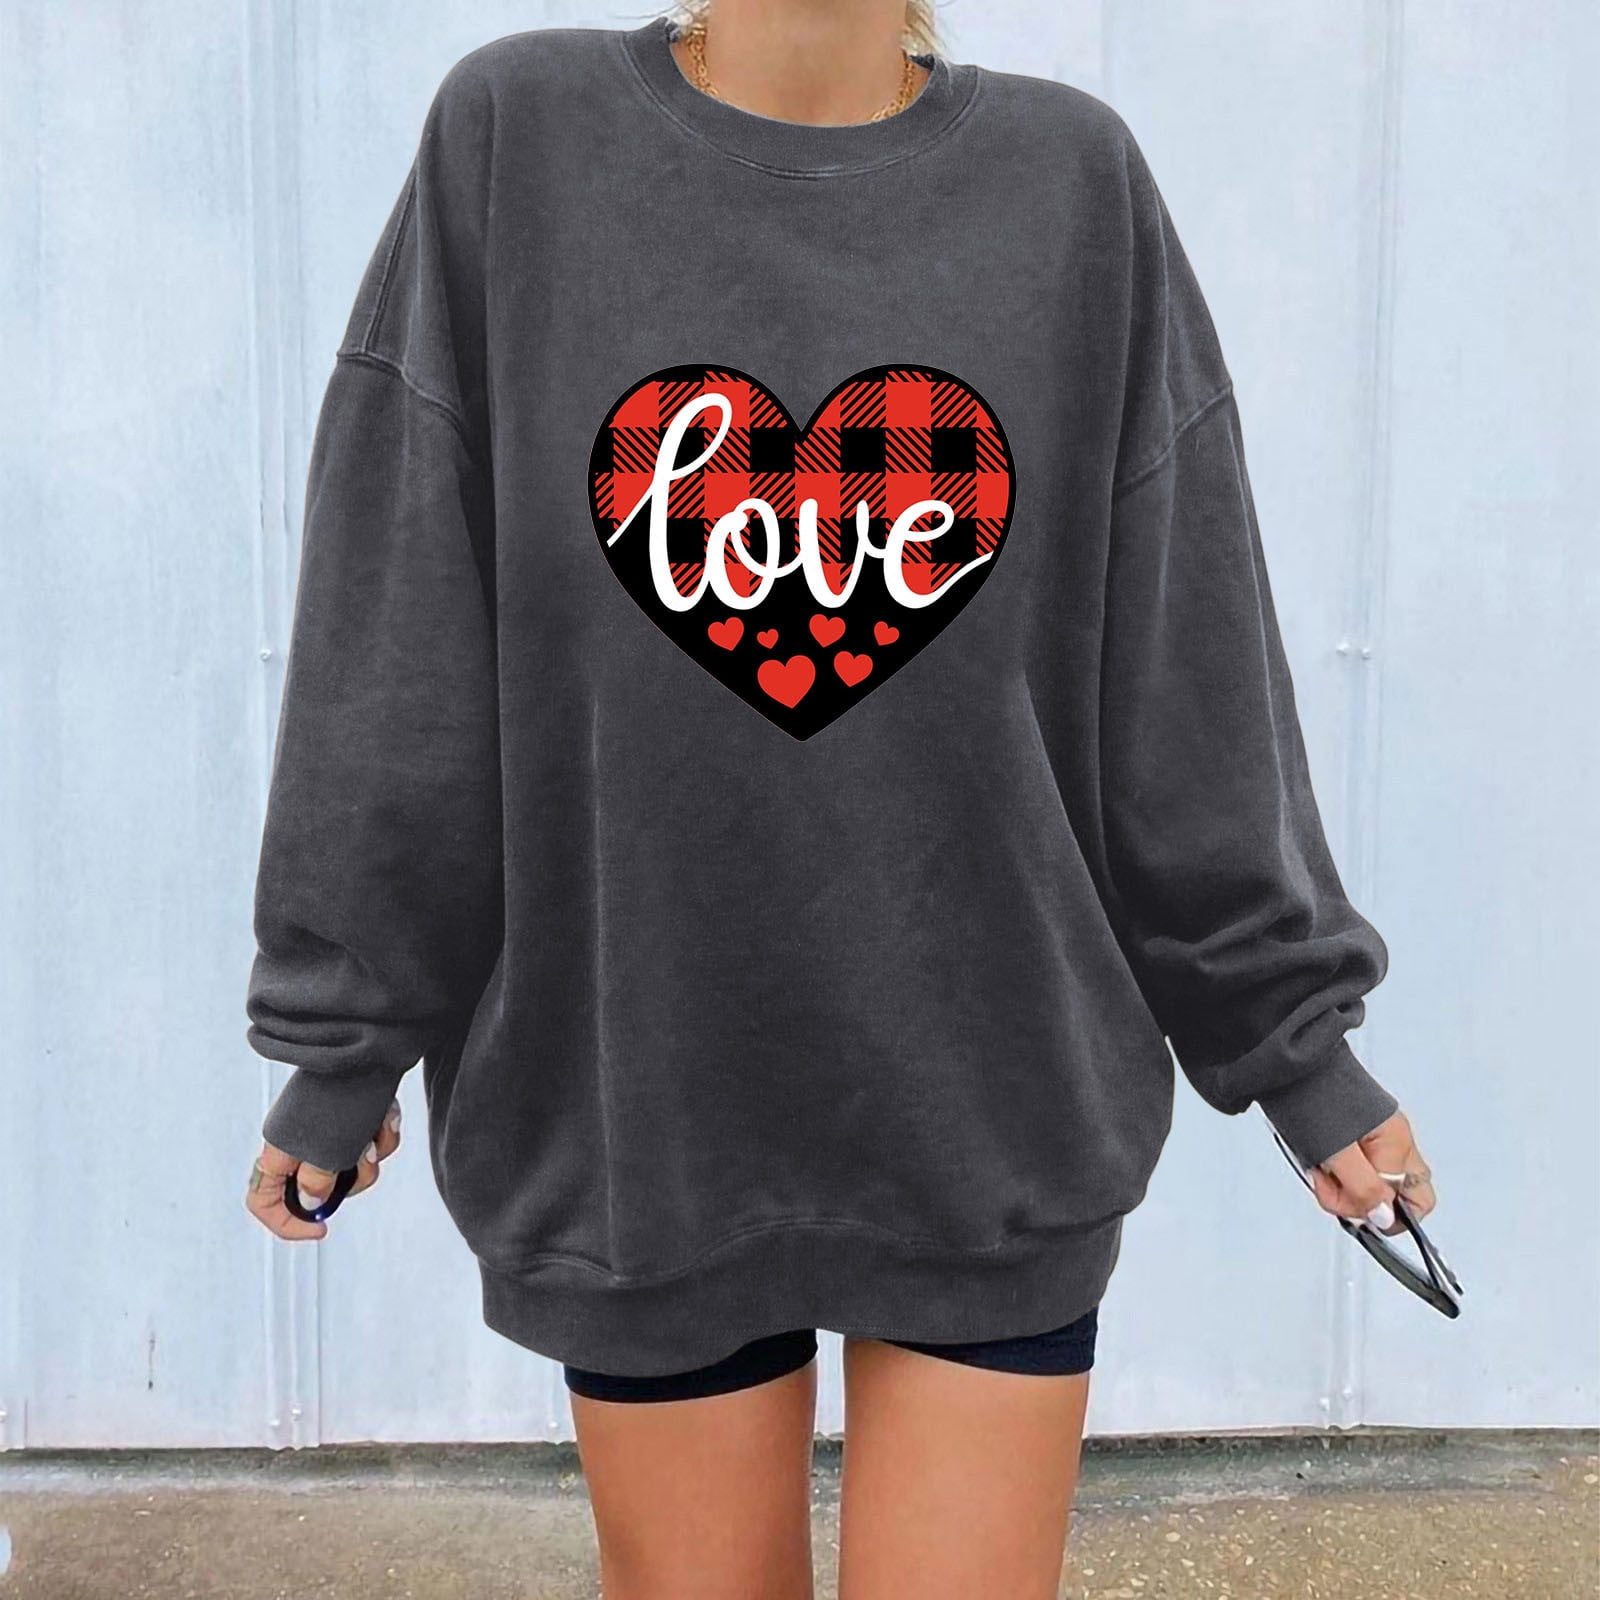  YFJRBR today deals prime clearance I'm Ok It's Not My Blood  Womens Printed Casual Long Sleeve Sweatshirt Halloween Shirts For Women  Plus Size Hoodies today deals prime clearance : Clothing, Shoes